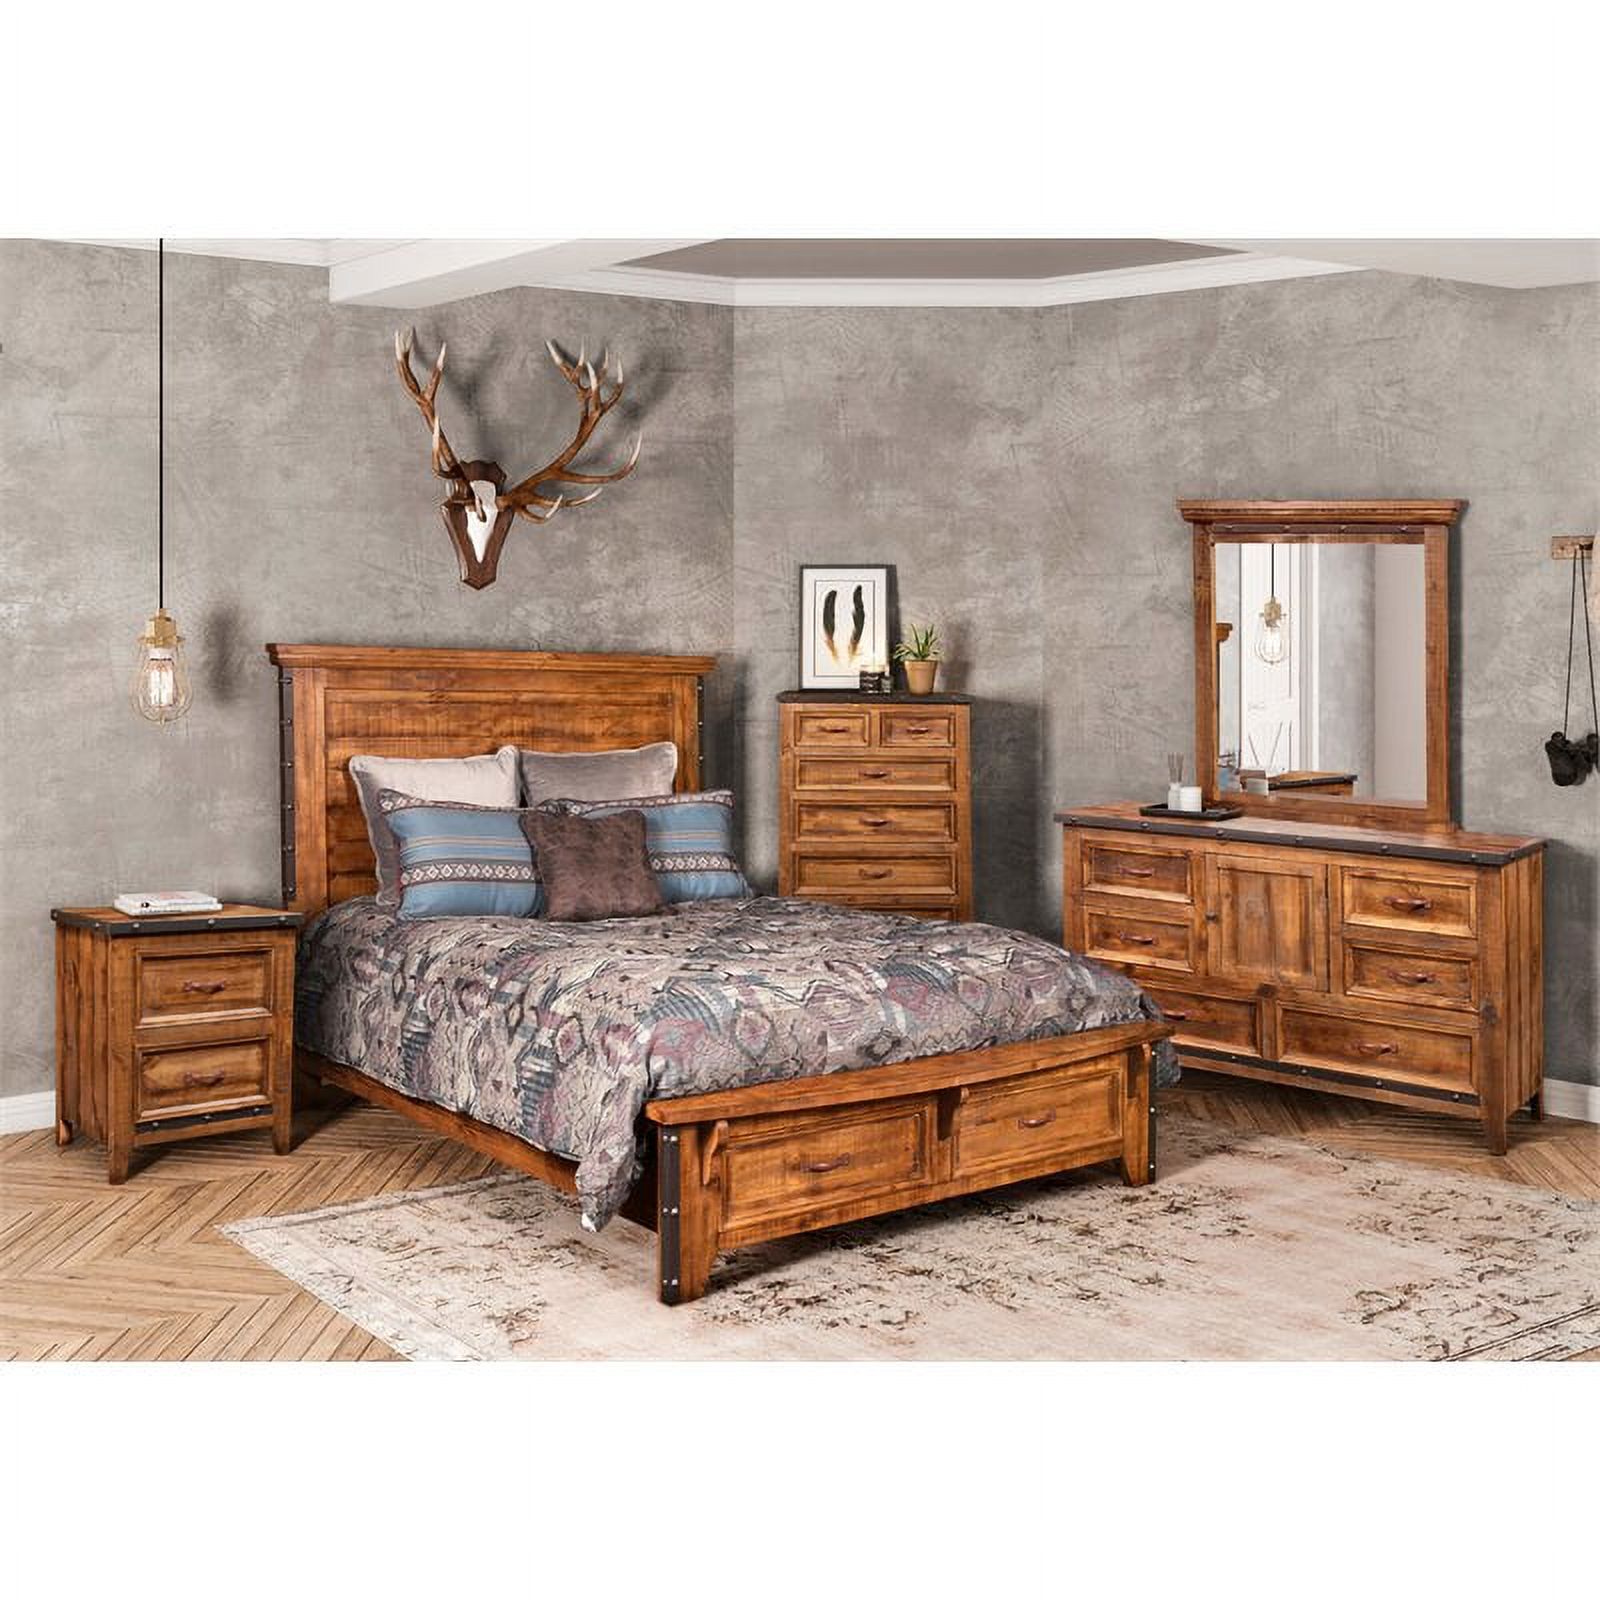 Sunset Trading Rustic City 5-Piece Contemporary Wood Queen Bedroom Set in Oak - image 2 of 7